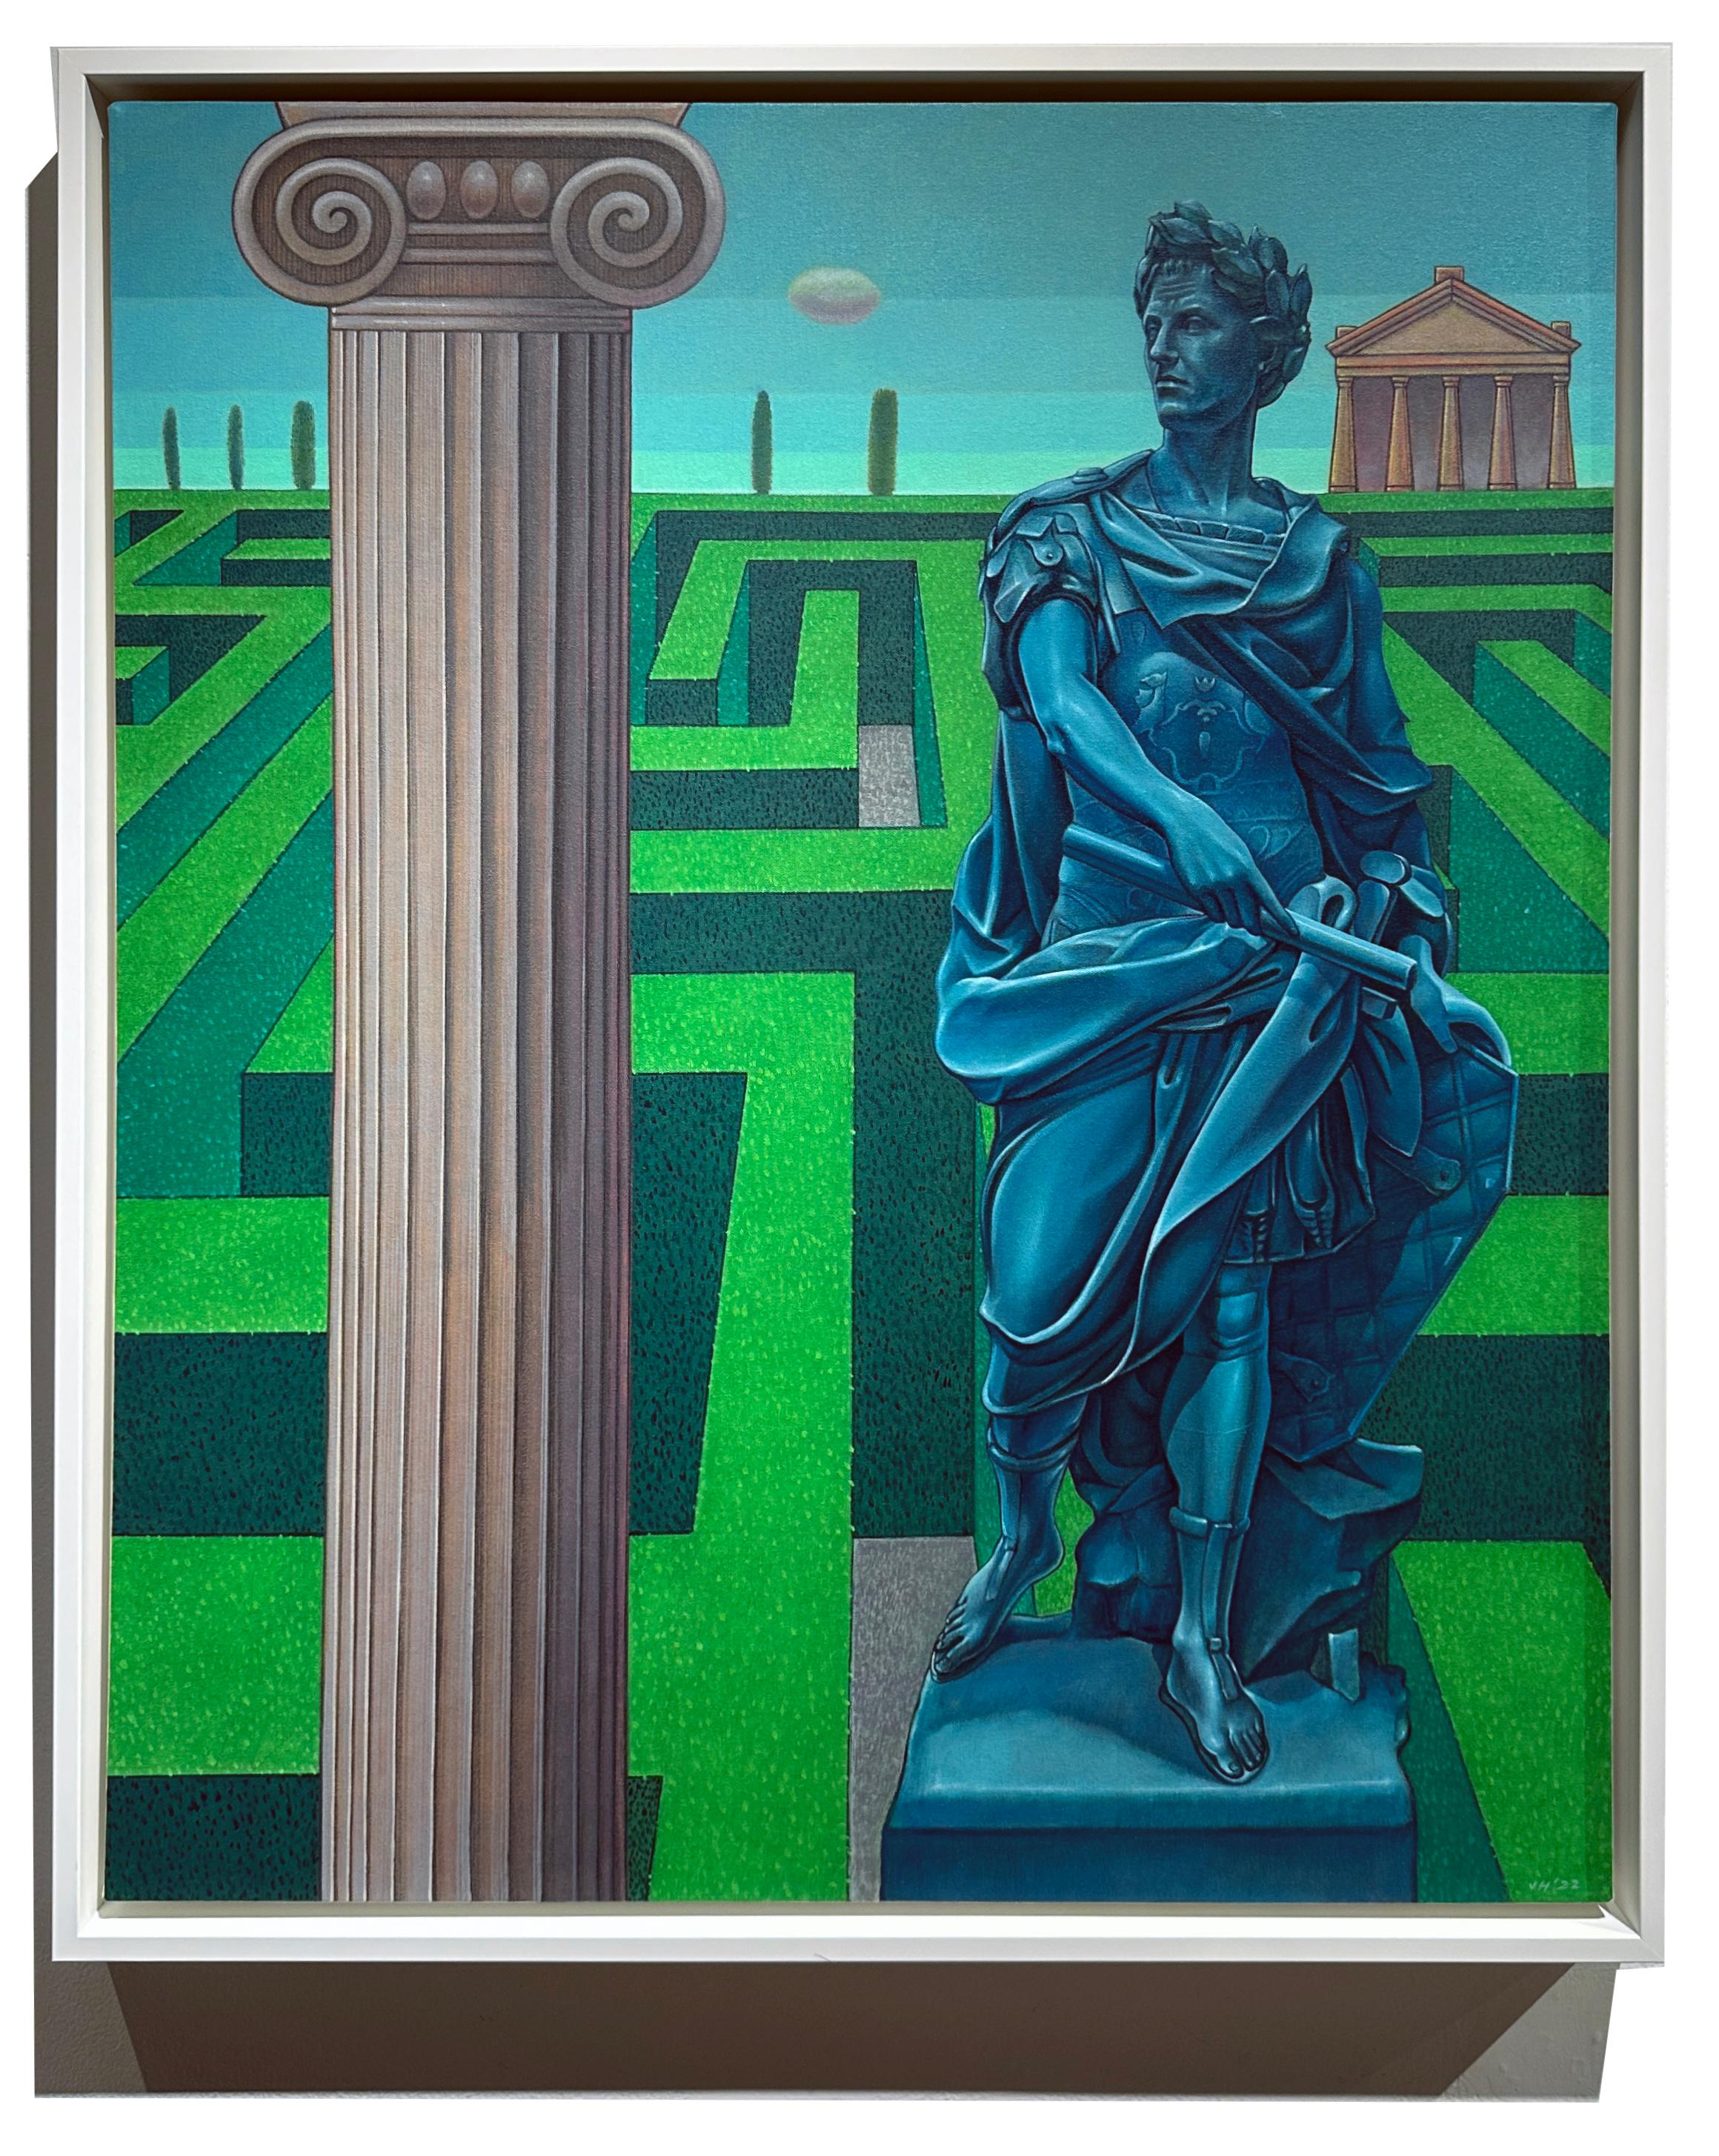 Render to Caesar, Surreal Scene with Classical Greek Scupture and Garden - Painting by John Hrehov